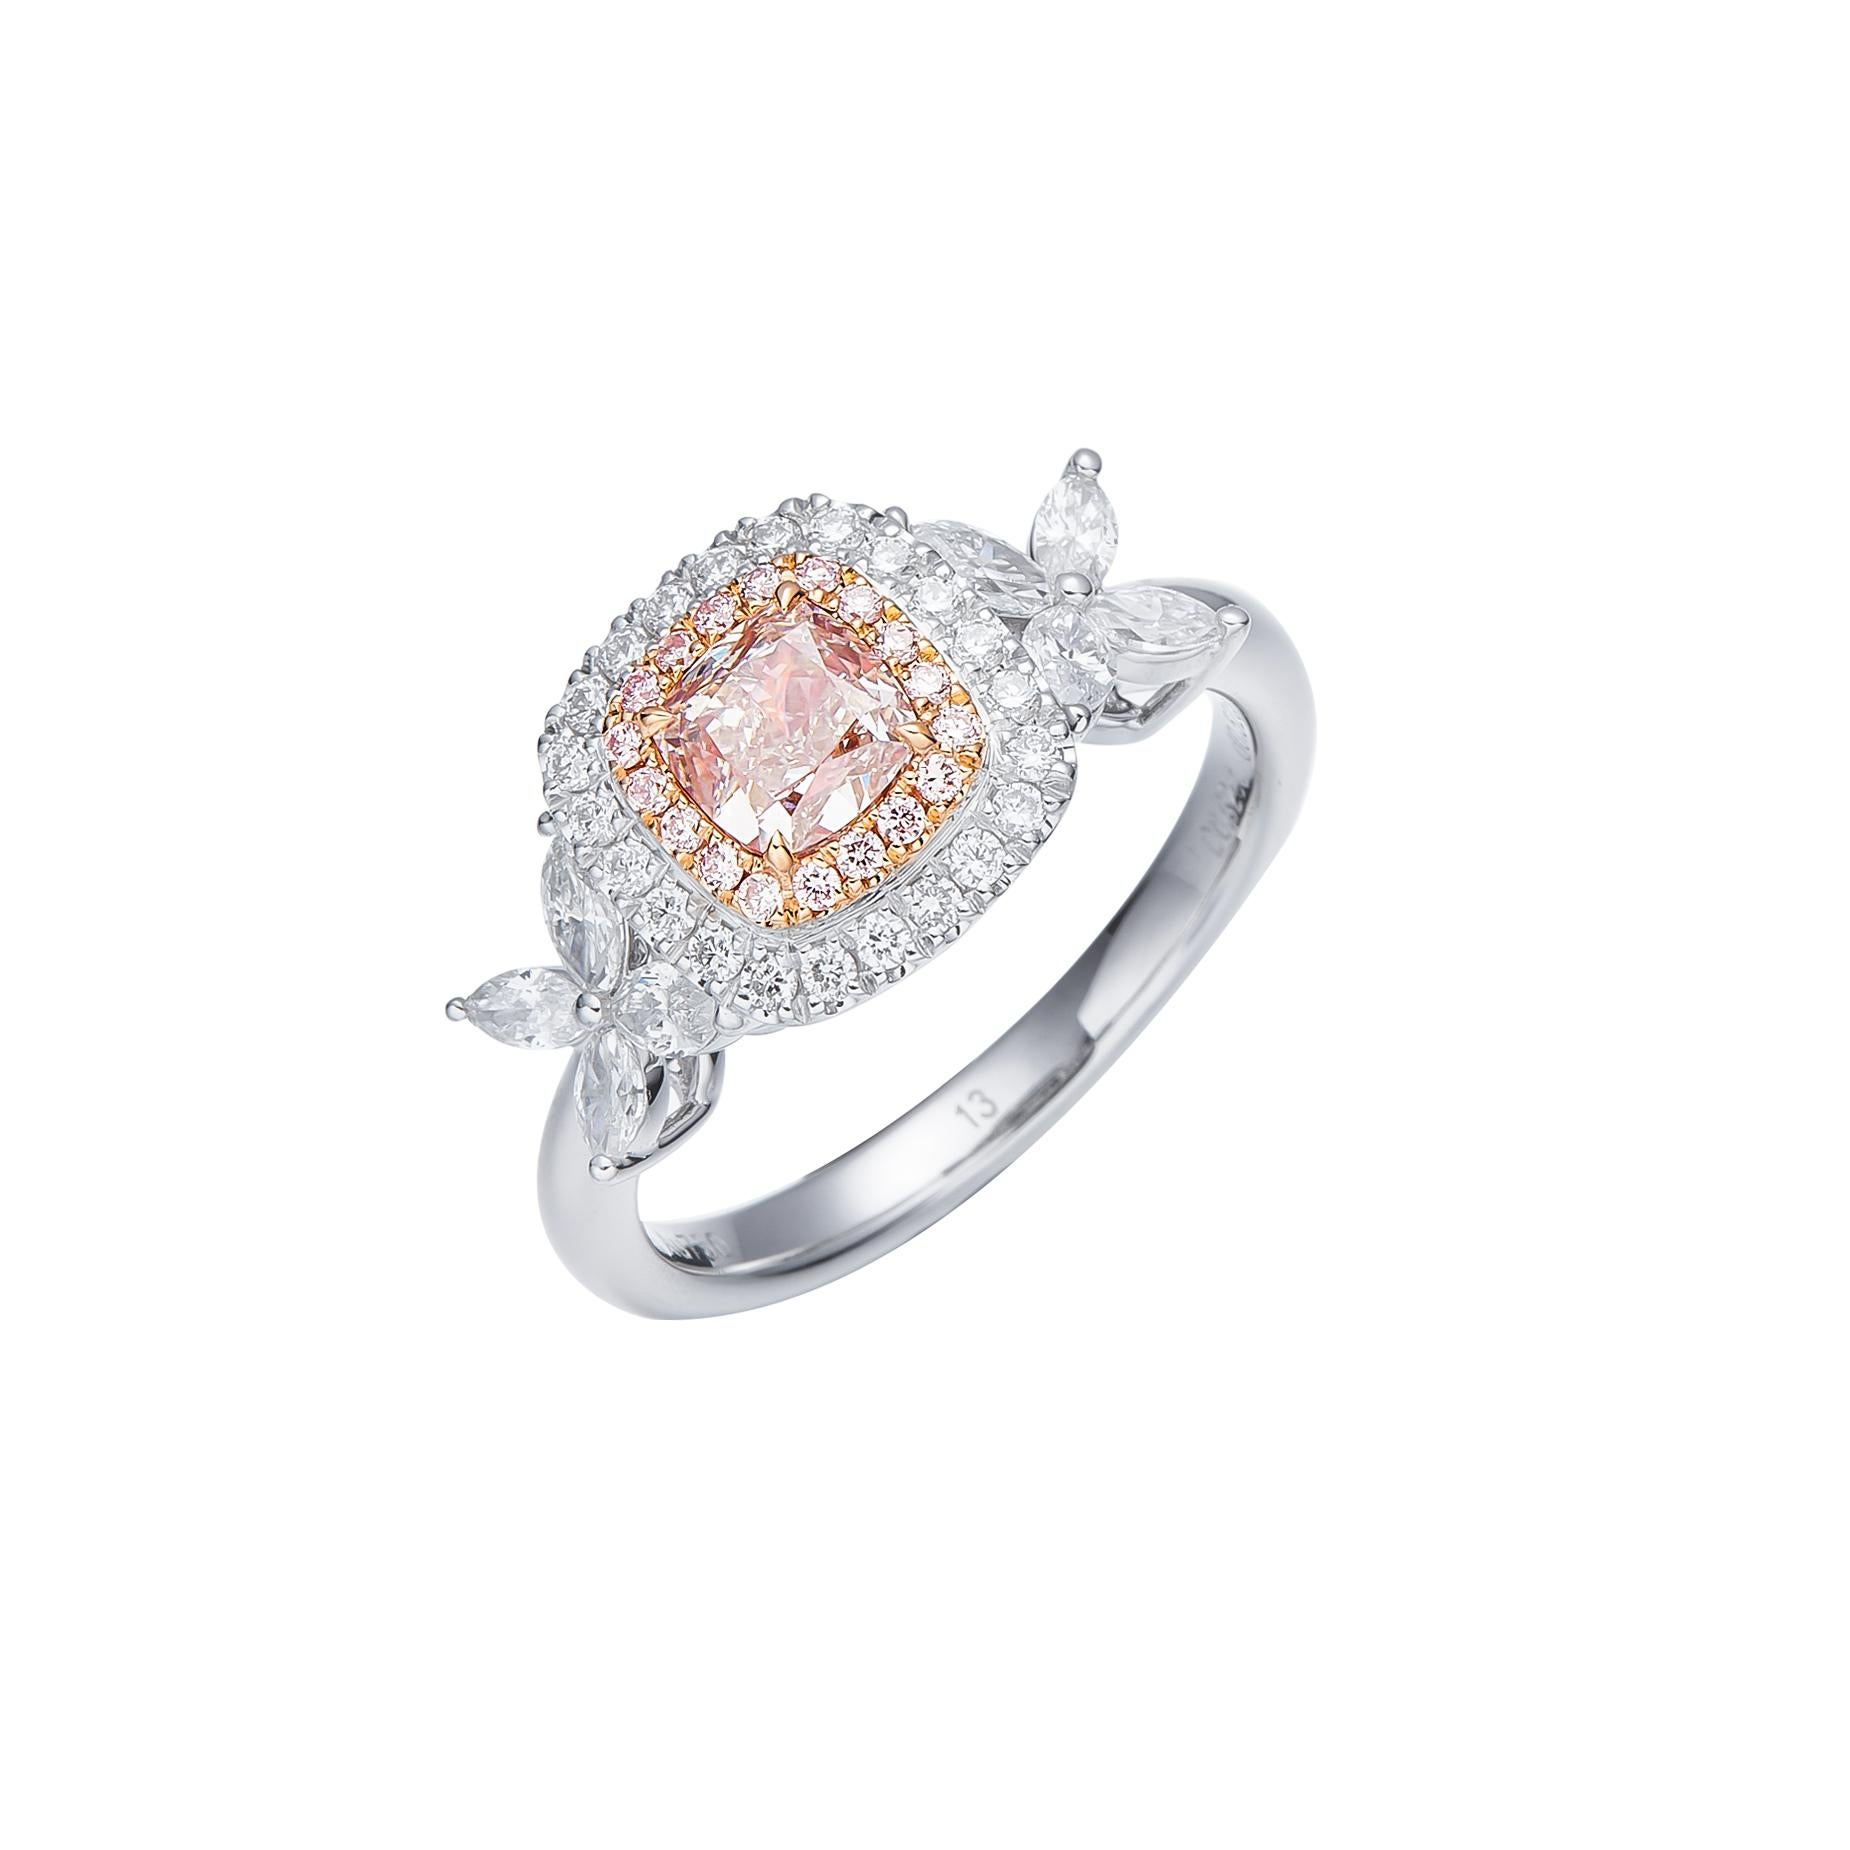 Discover Elegance Redefined: Introducing the Exquisite GIA Certified 0.62ct Natural Light Pinkish Brown Cushion Cut Diamond Solitaire Ring, a true testament to the allure of rare and captivating beauty. Crafted with meticulous care and set in